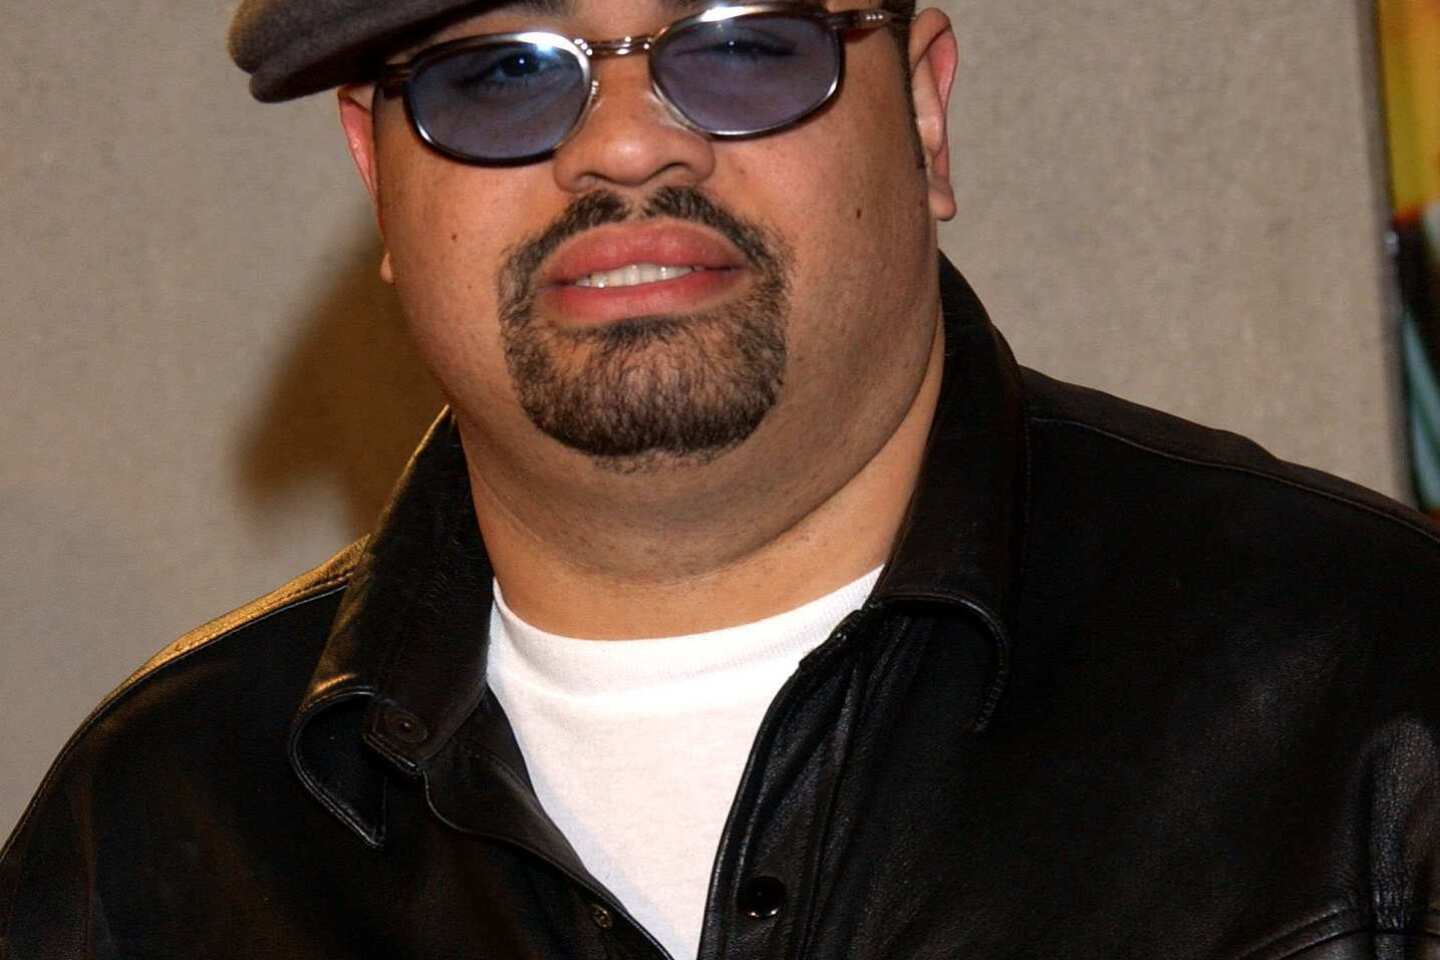 Heavy D obituary: Singer who shaped rap in the '80s dies at 44